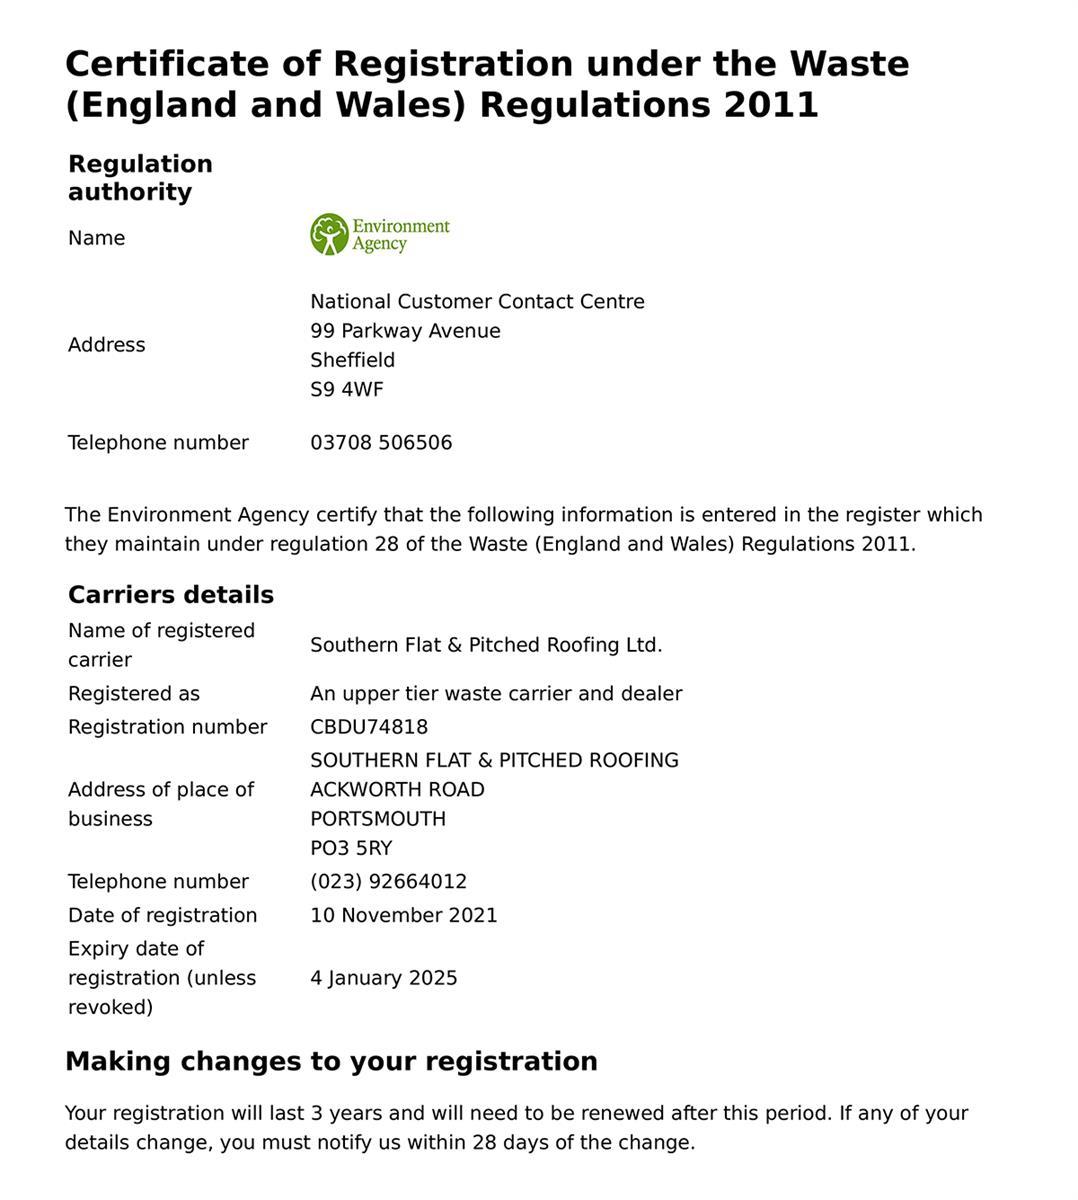 Certificate of Registration under the Waste (England and Wales) Regulations 2011